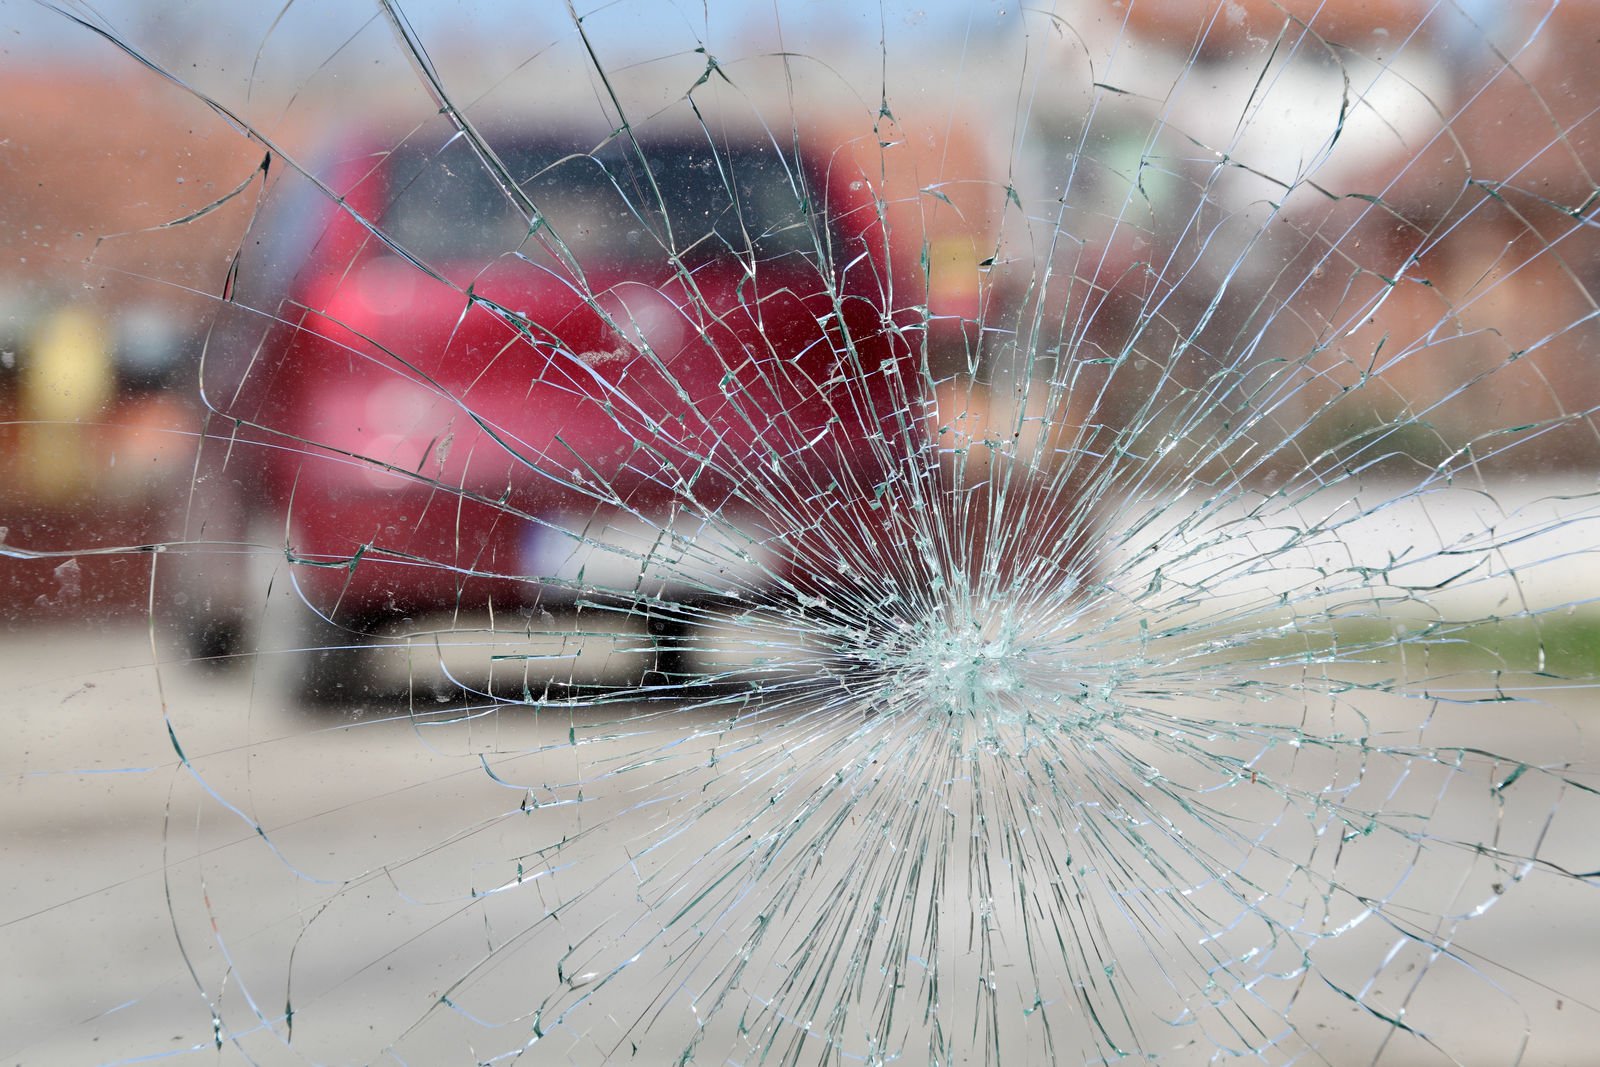 Louisiana Windshield Insurance: What are the full glass coverage laws in Louisiana?